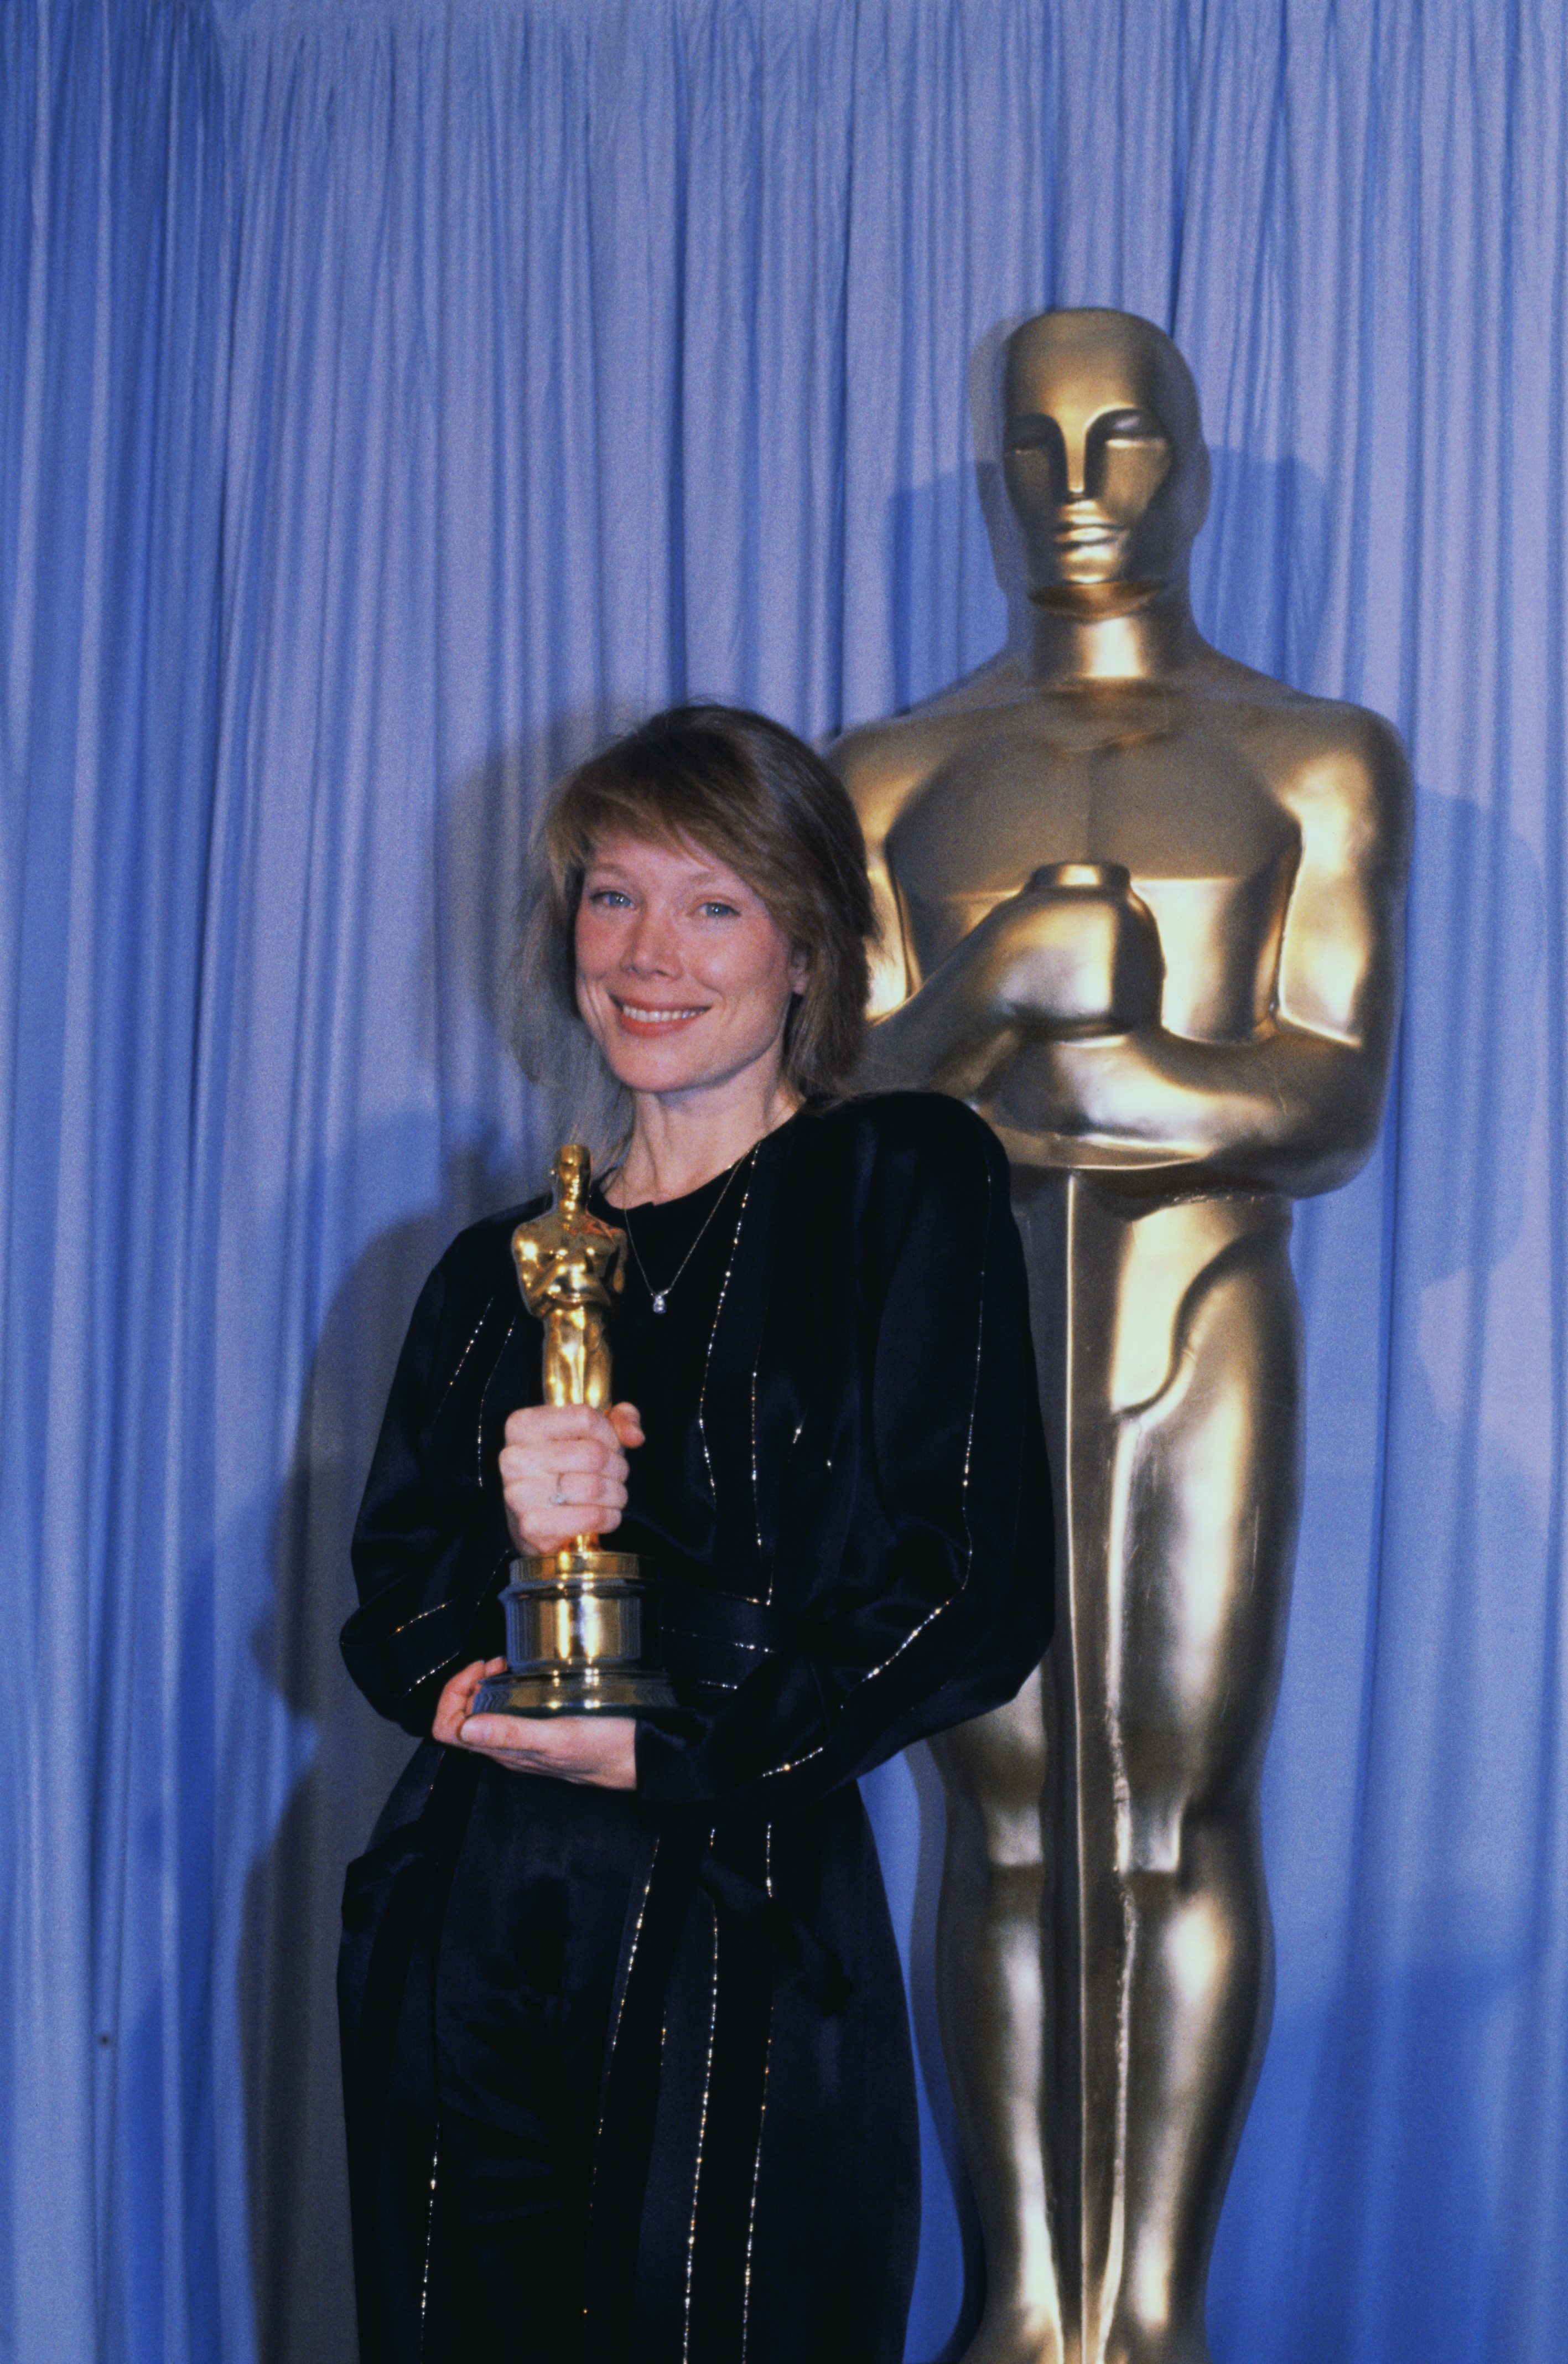 Sissy Spacek poses with her Oscar Award for Best Actress for her role in the movie "Coal Miner's Daughter" on March 31, 1981 | Source: Getty Images